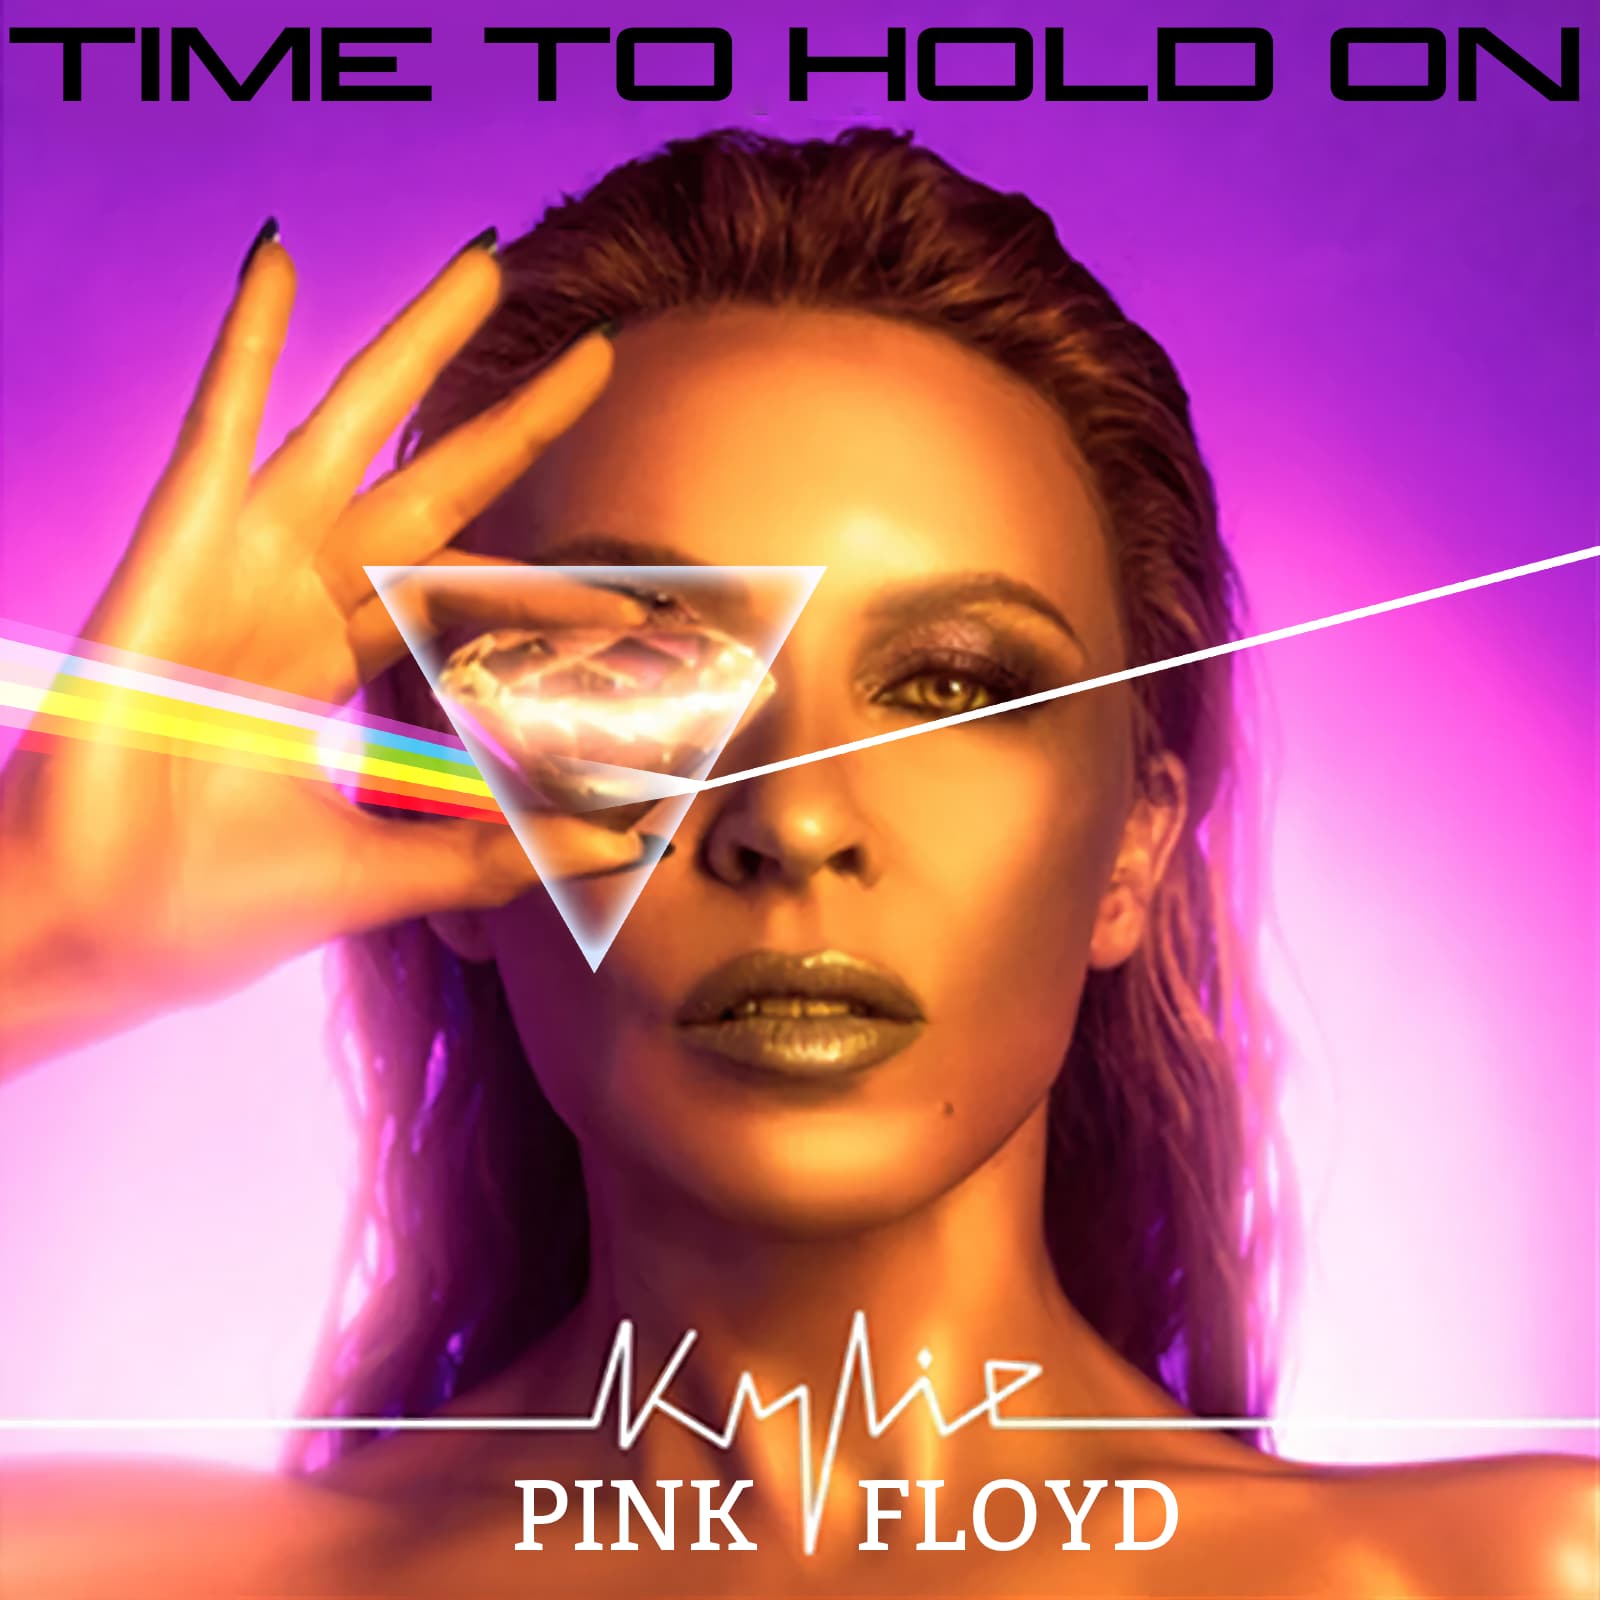 tbc aka Instamatic - Time To Hold On (Kylie Minogue vs Pink Floyd) video mashup cover